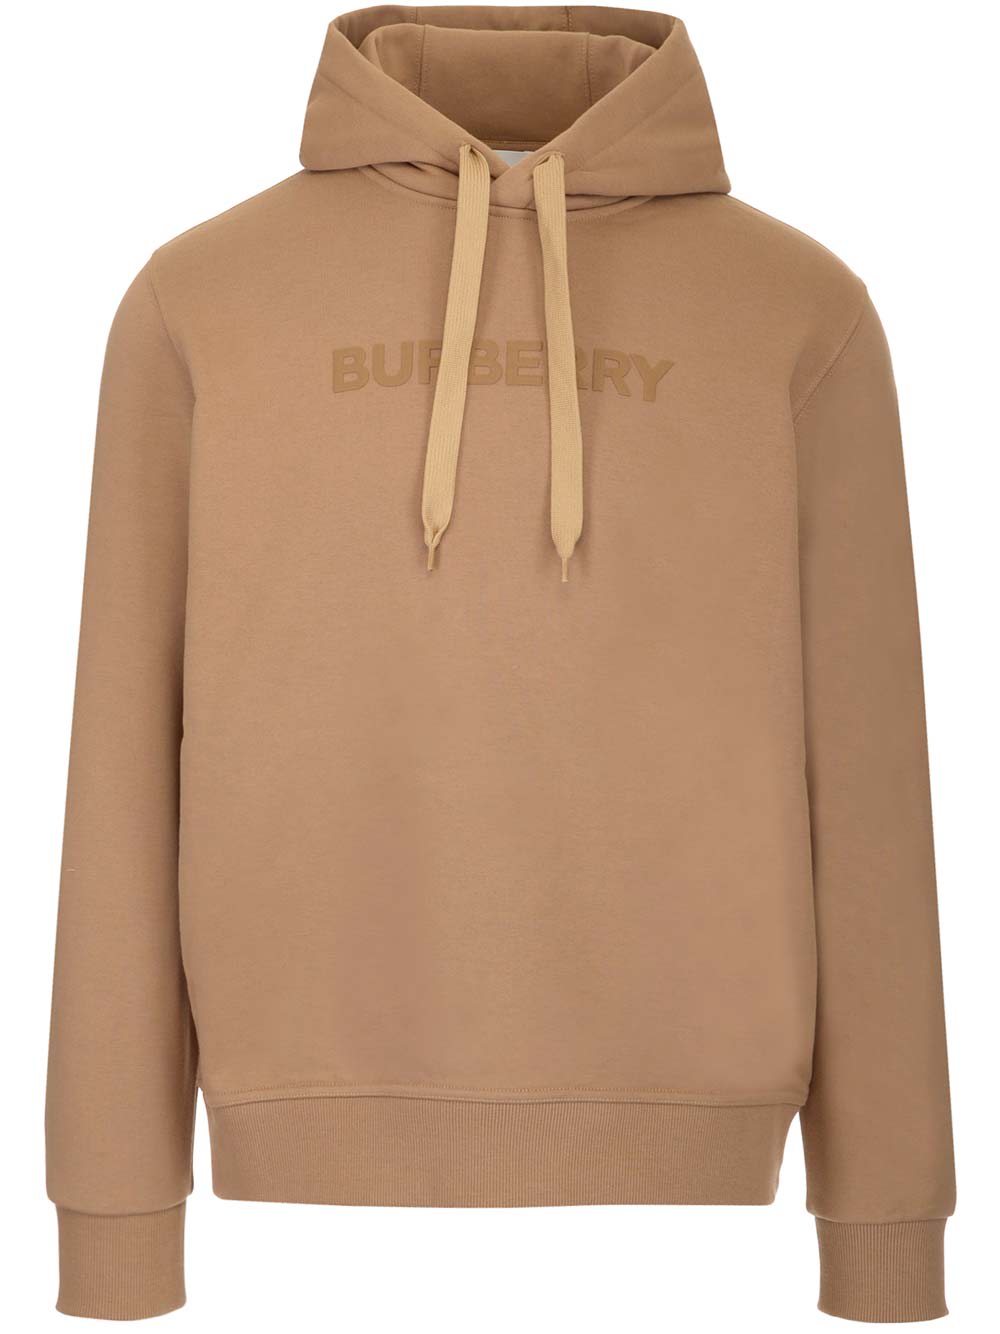 BURBERRY CAMEL COLORED COTTON HOODIE